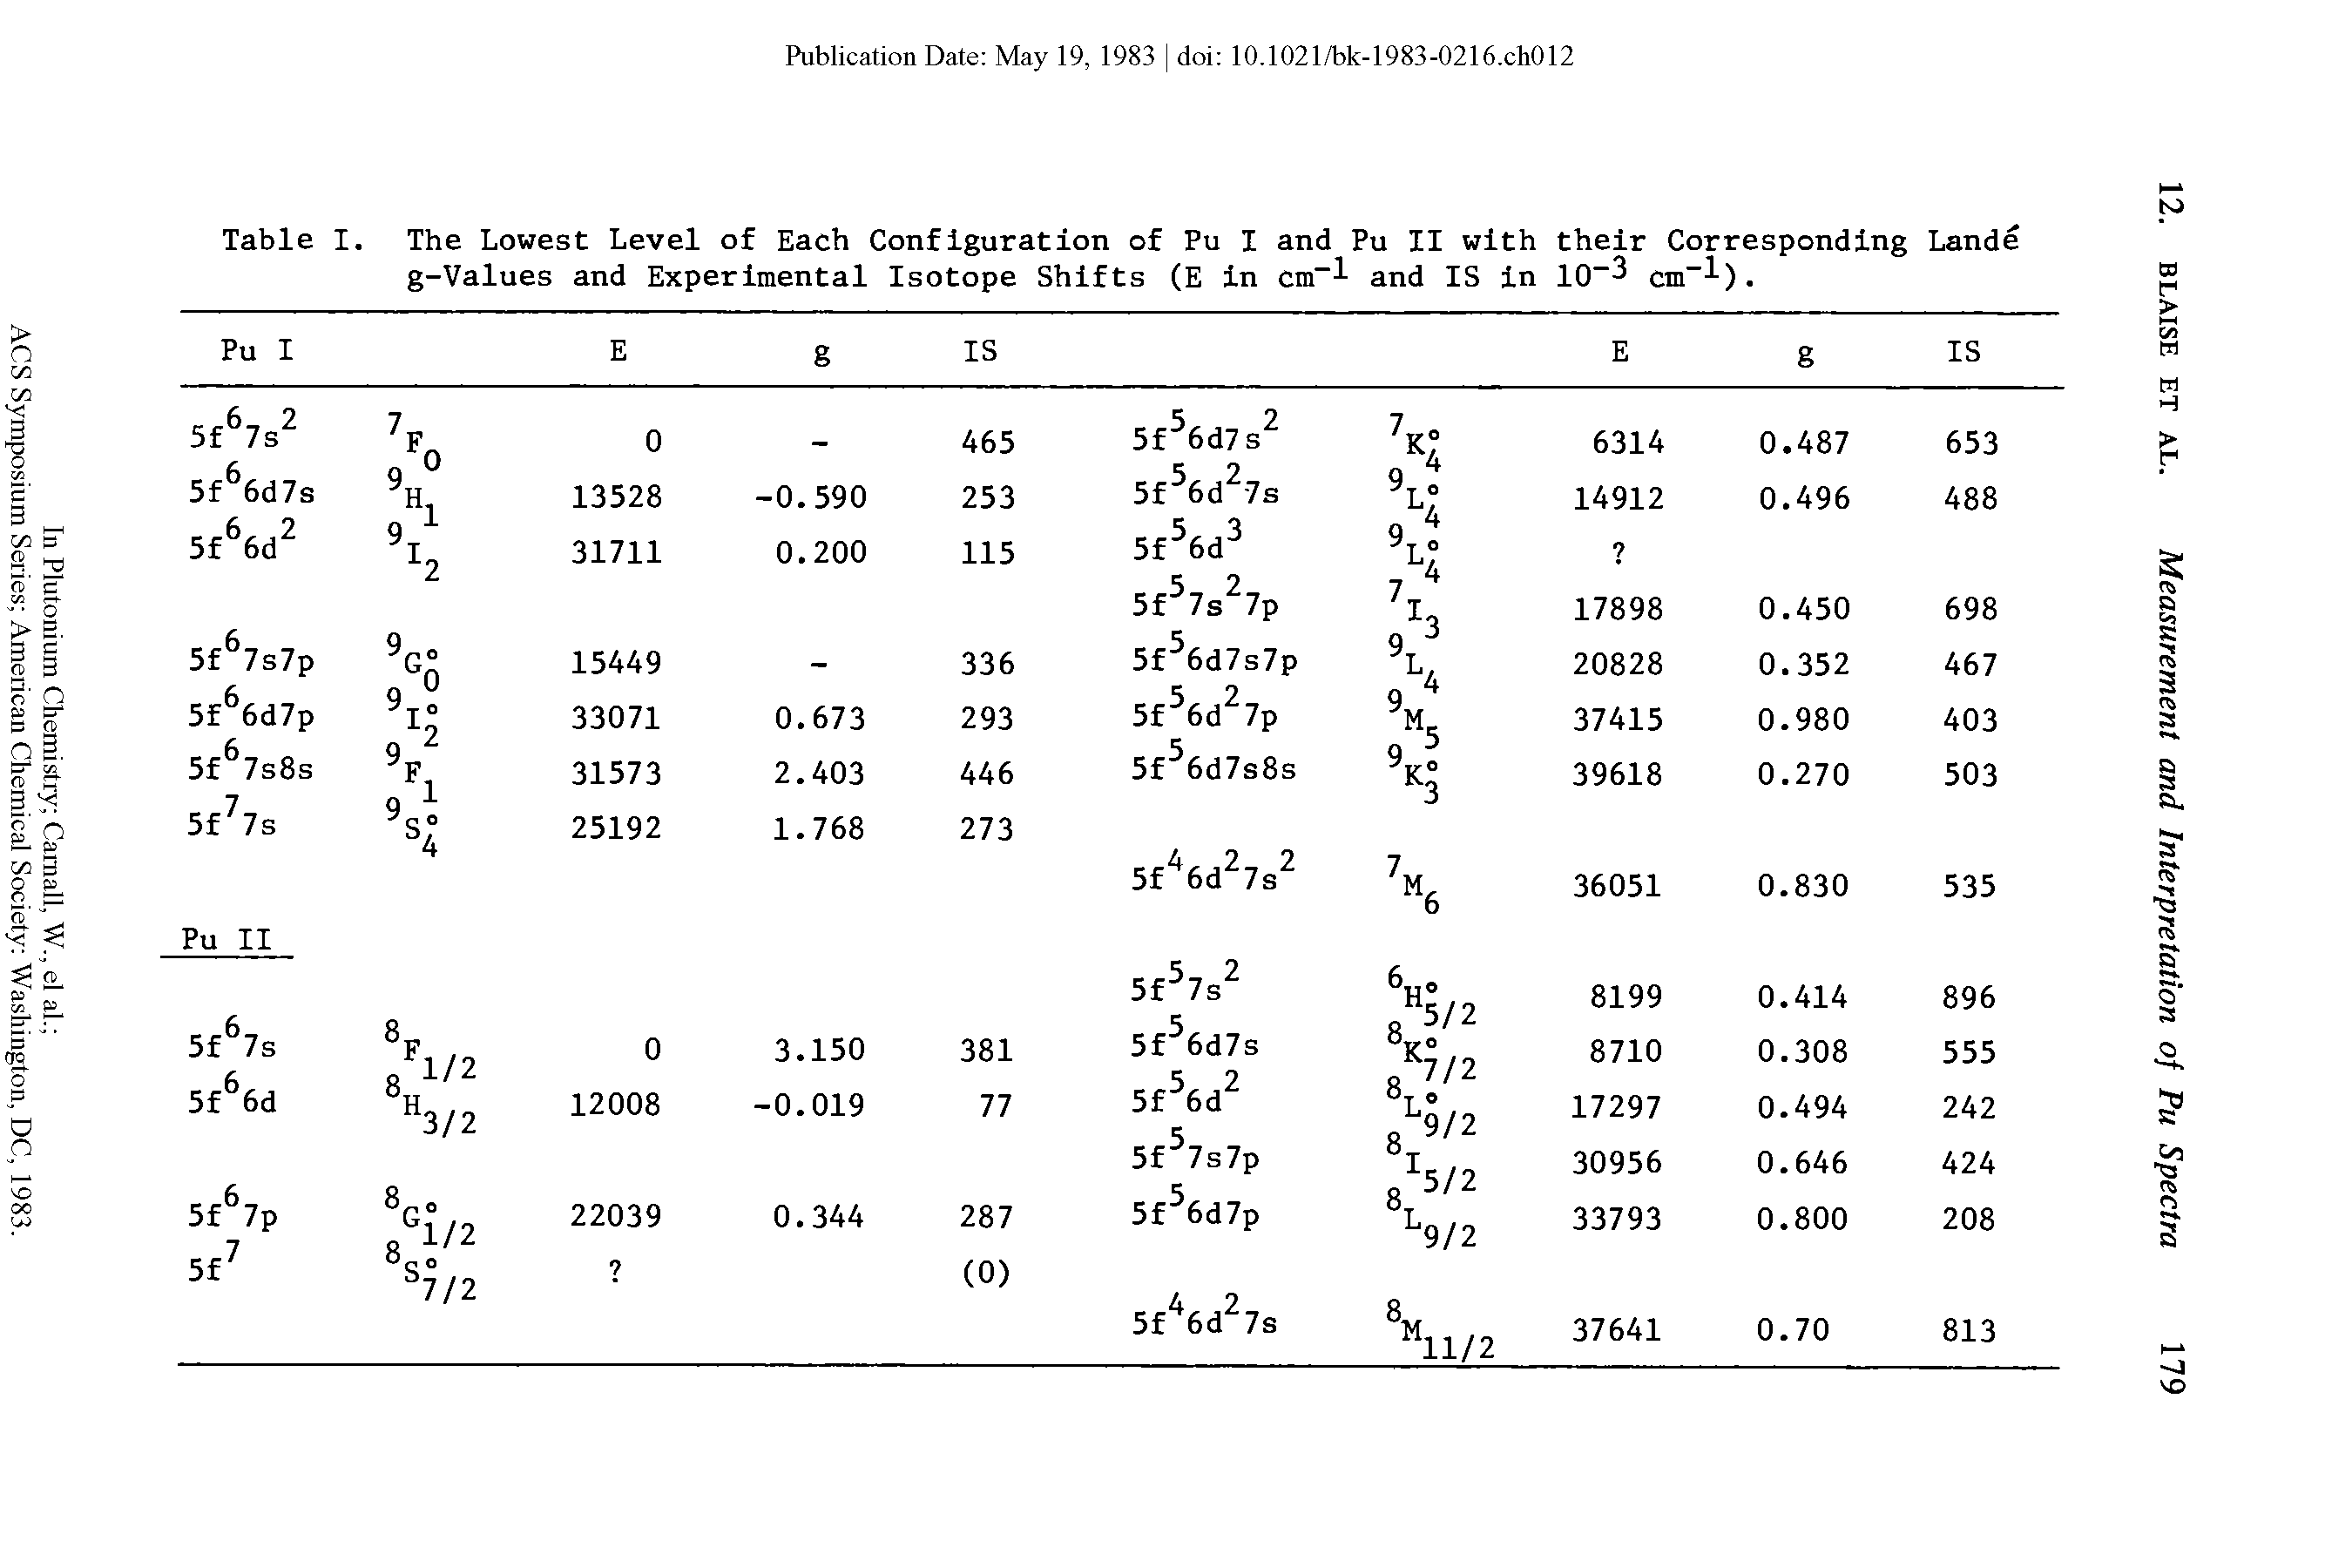 Table I. The Lowest Level of Each Configuration of Pu I and Pu II with their Corresponding Lande g-Values and Experimental Isotope Shifts (E in cm-l and IS in 10-2 cm-l).